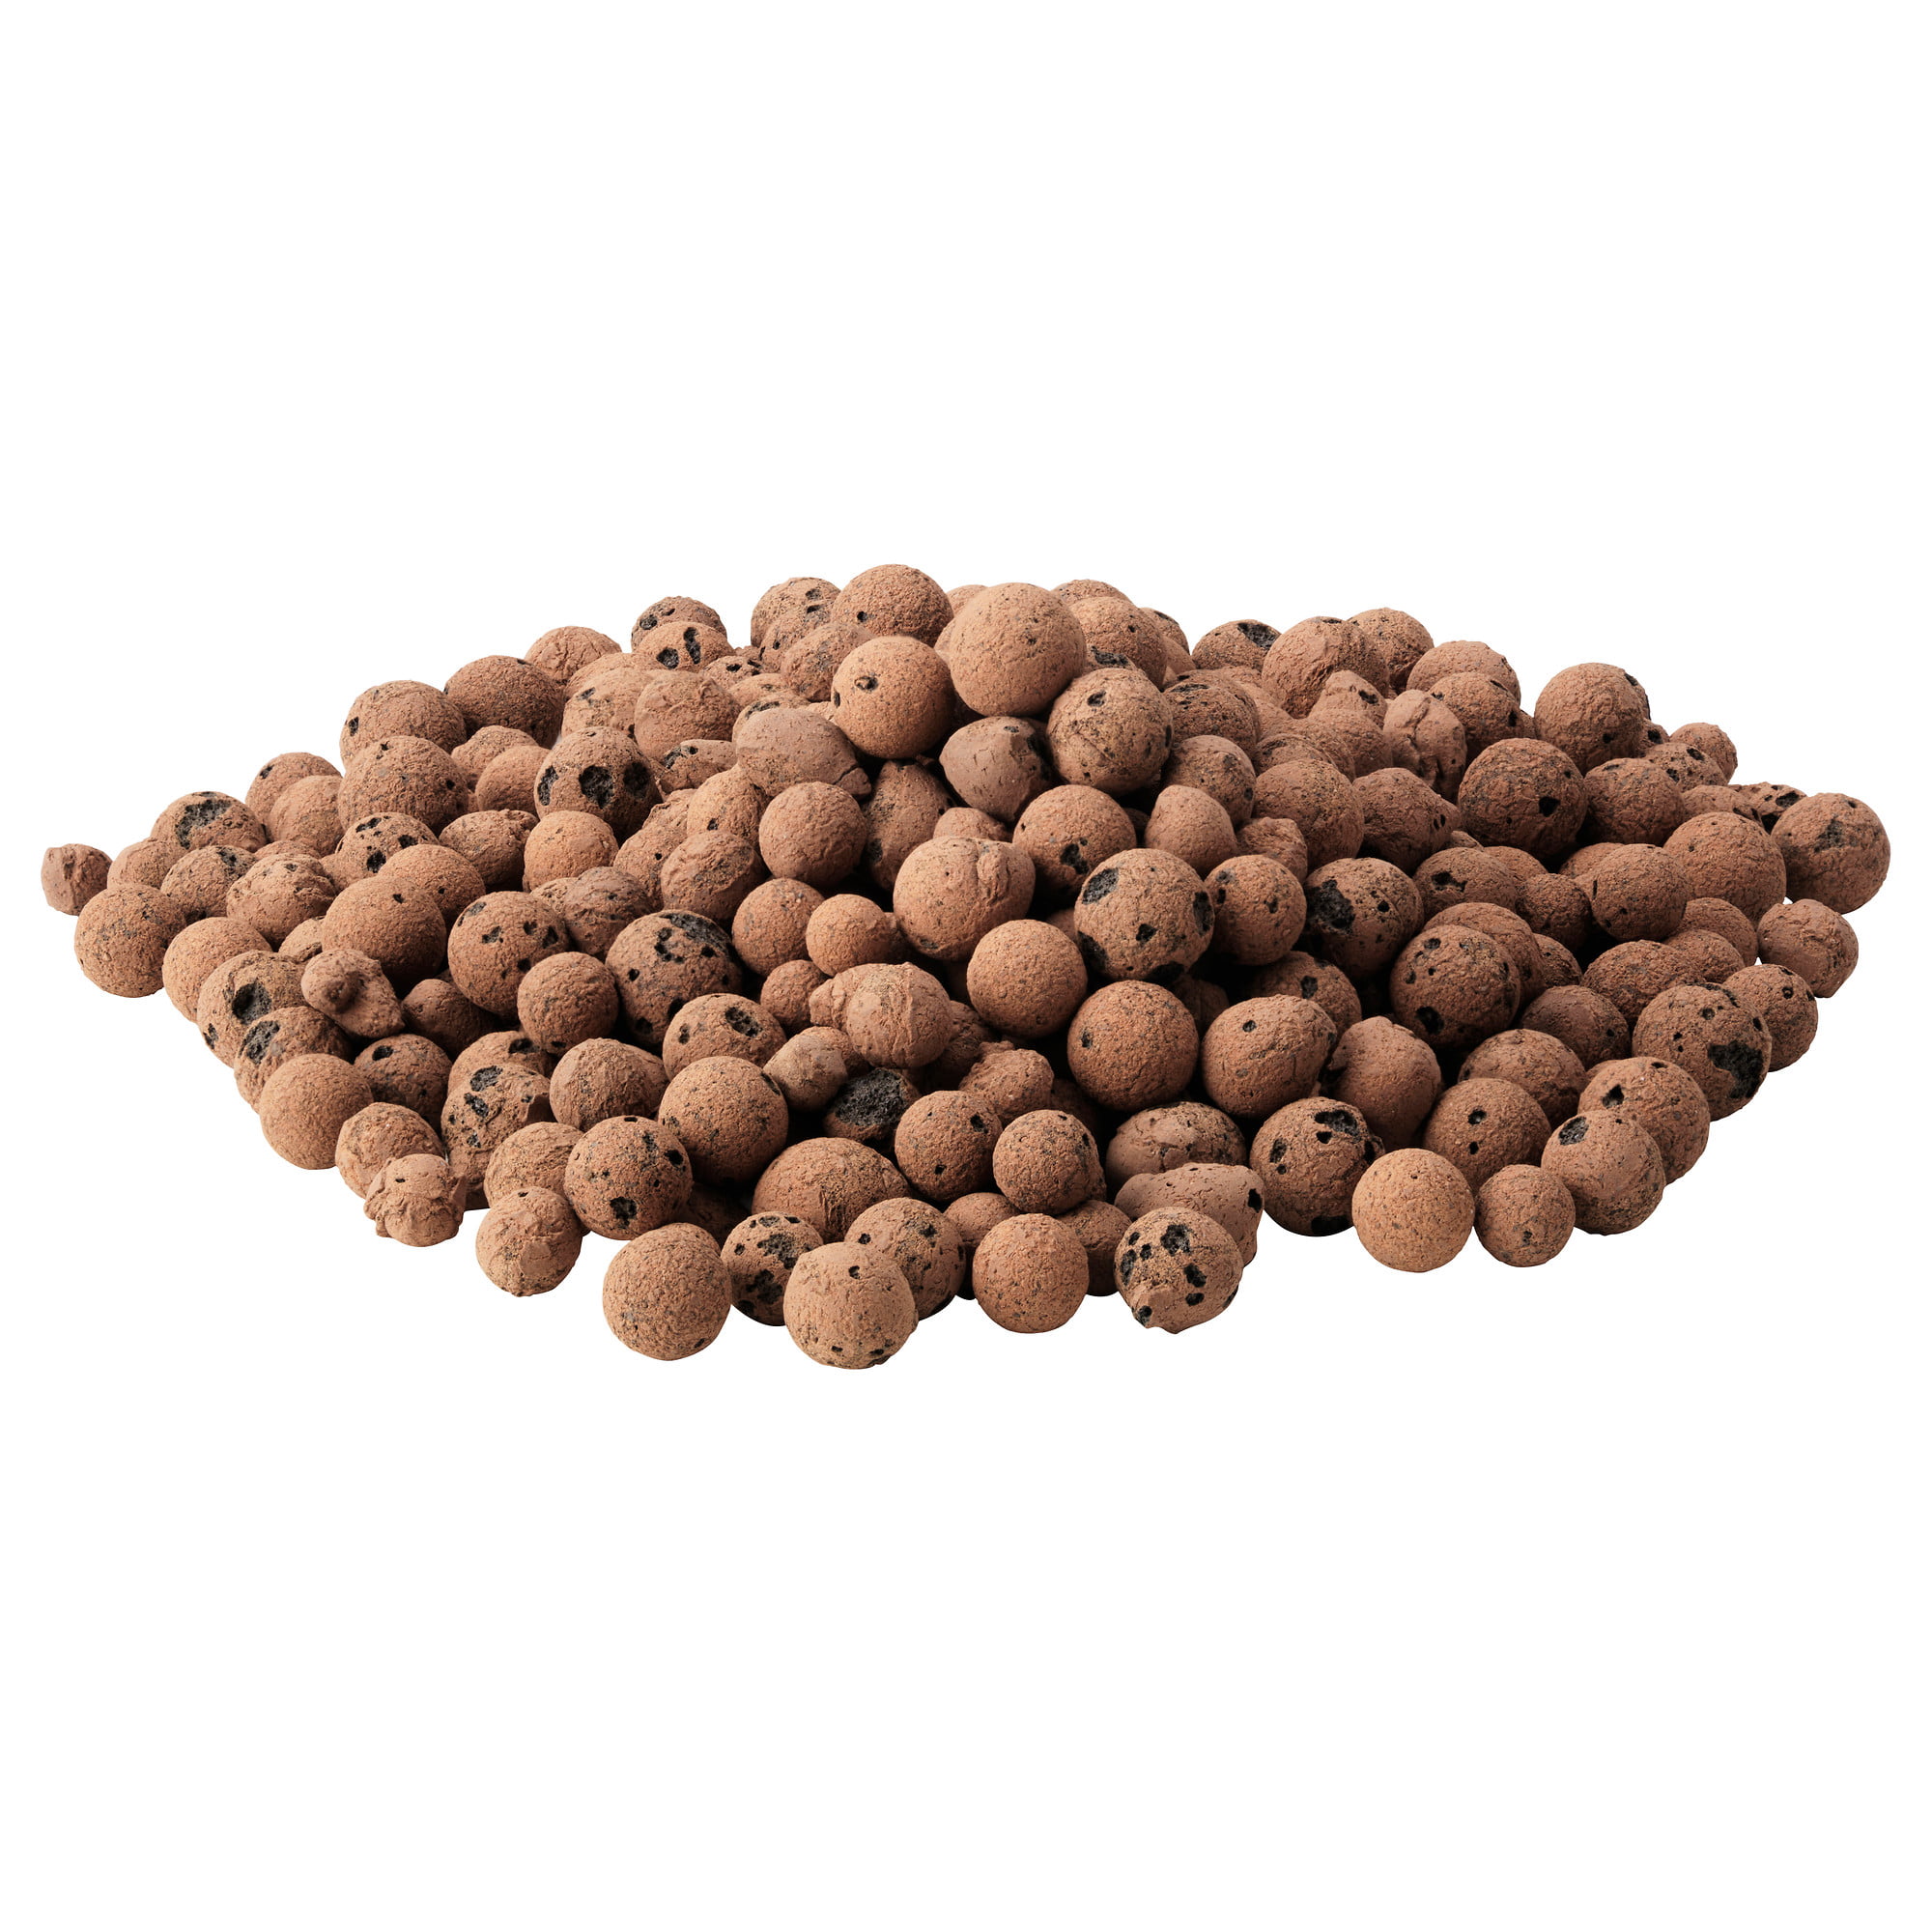  Expanded Clay Aggregate Pebbles Hydroponic Growing Media 